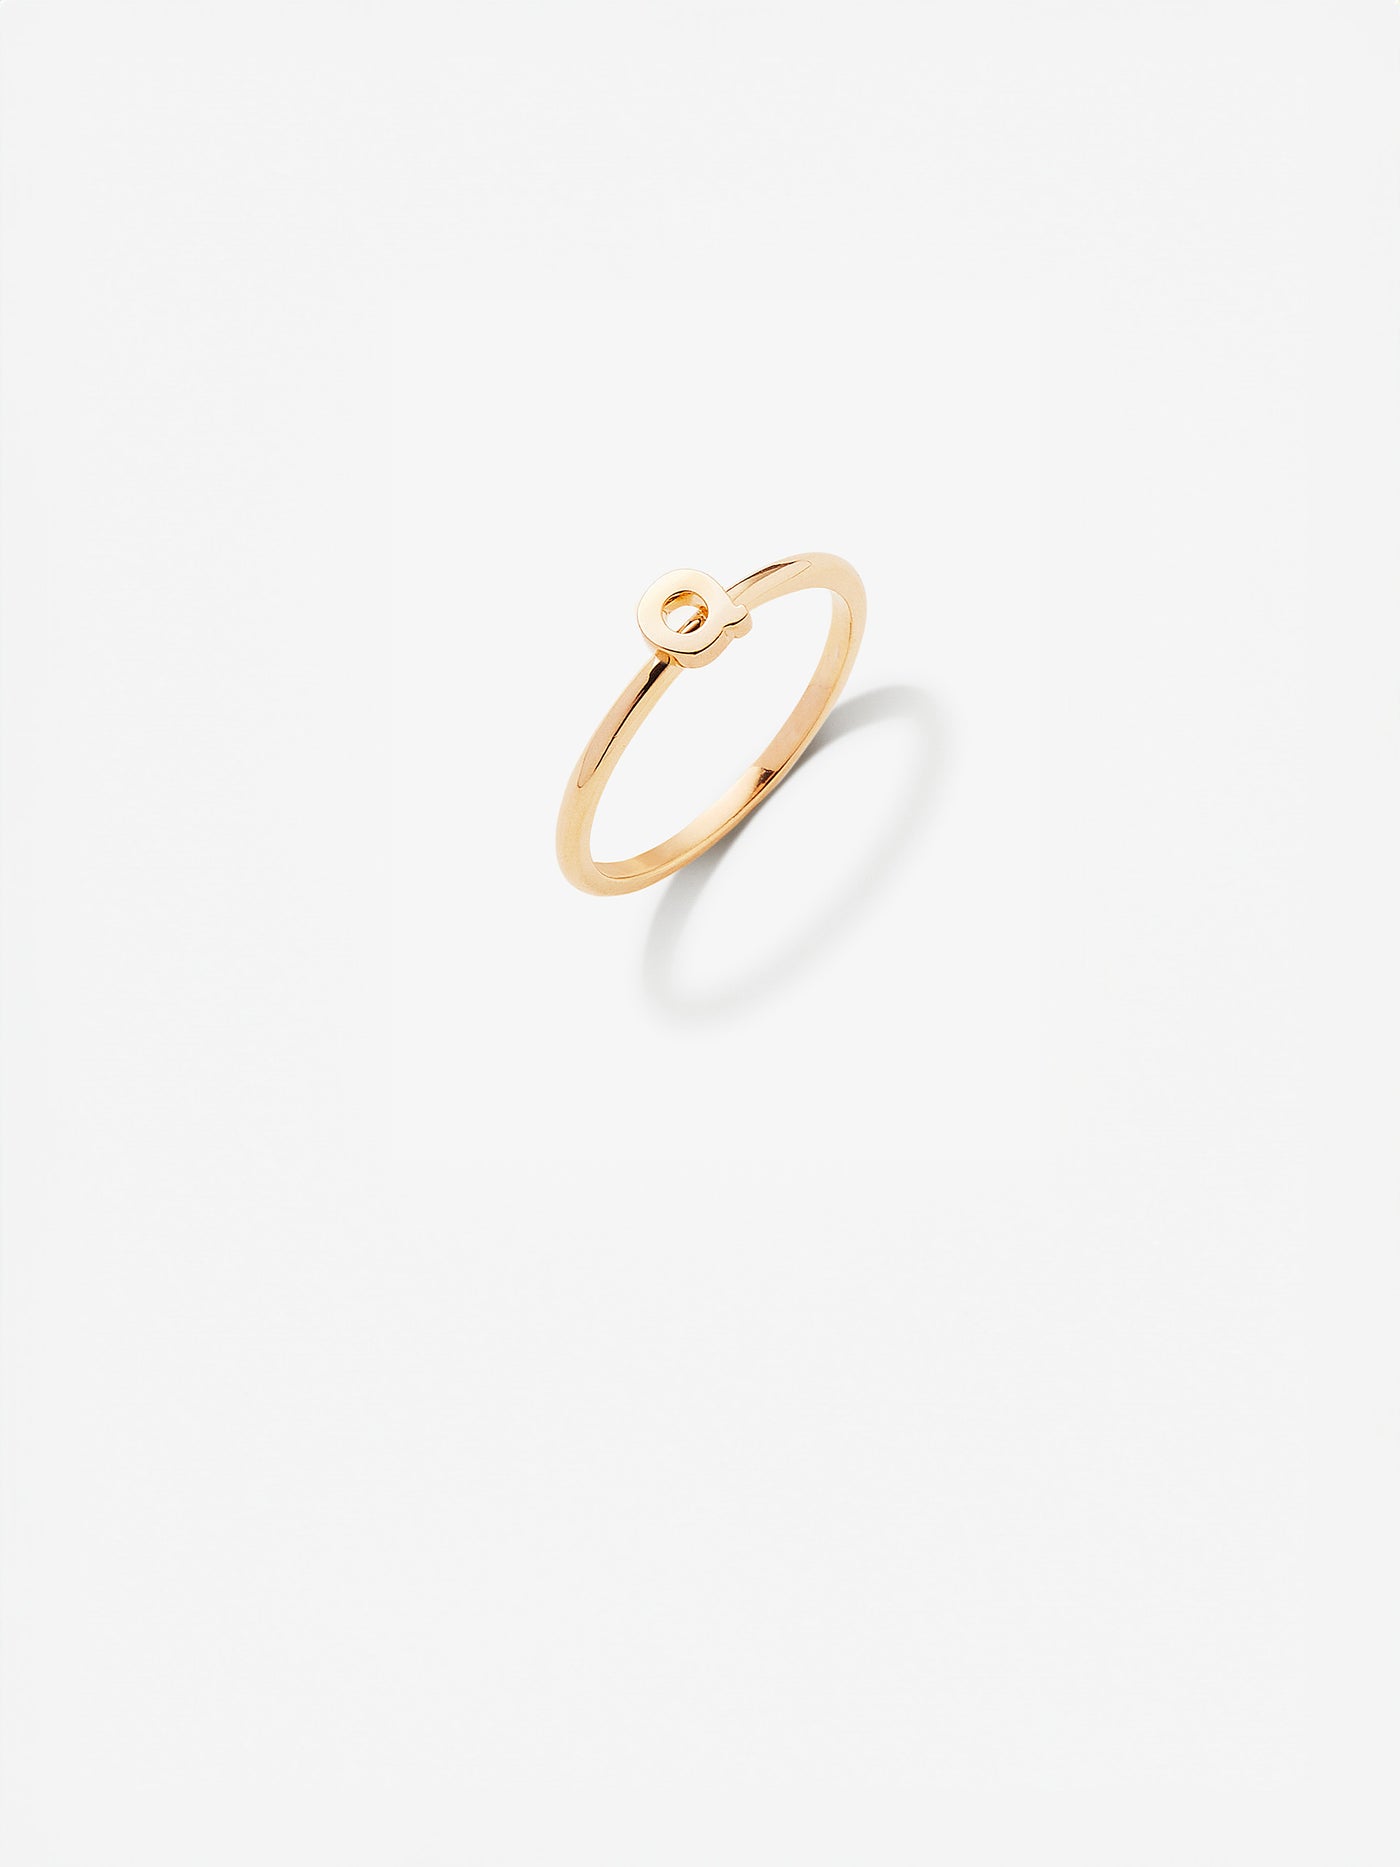 Close-up image of a personalised Q gold ring adorned with intricate, miniature dimensional letters from the alphabet on a light grey background 